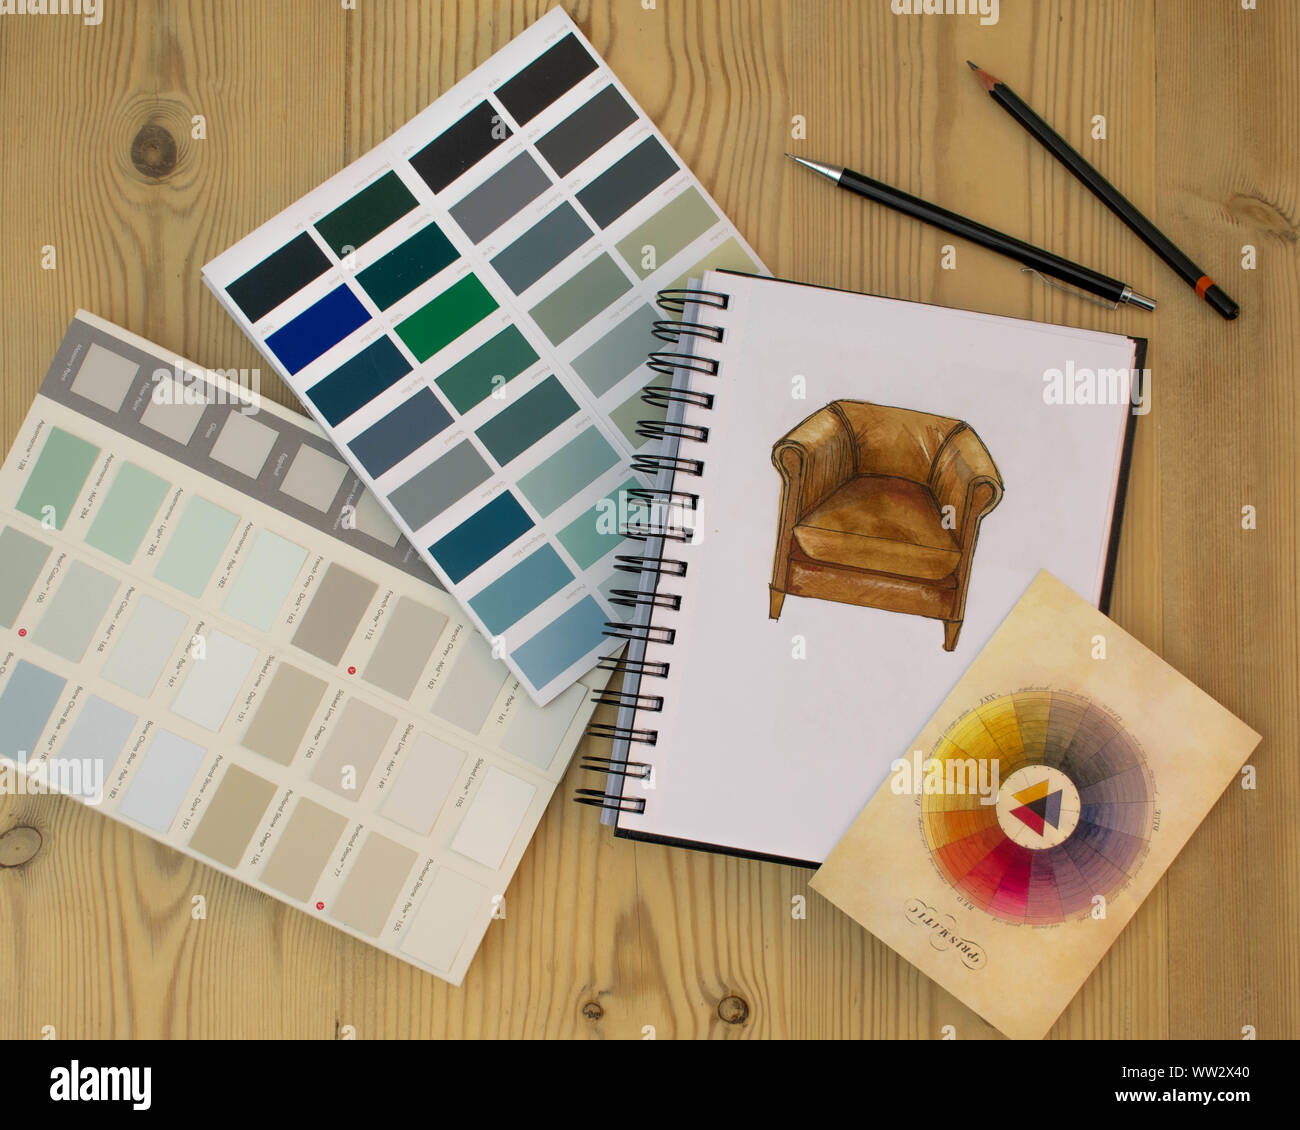 Flat lay of Interior designer work space with sketches, tools and colour charts Stock Photo